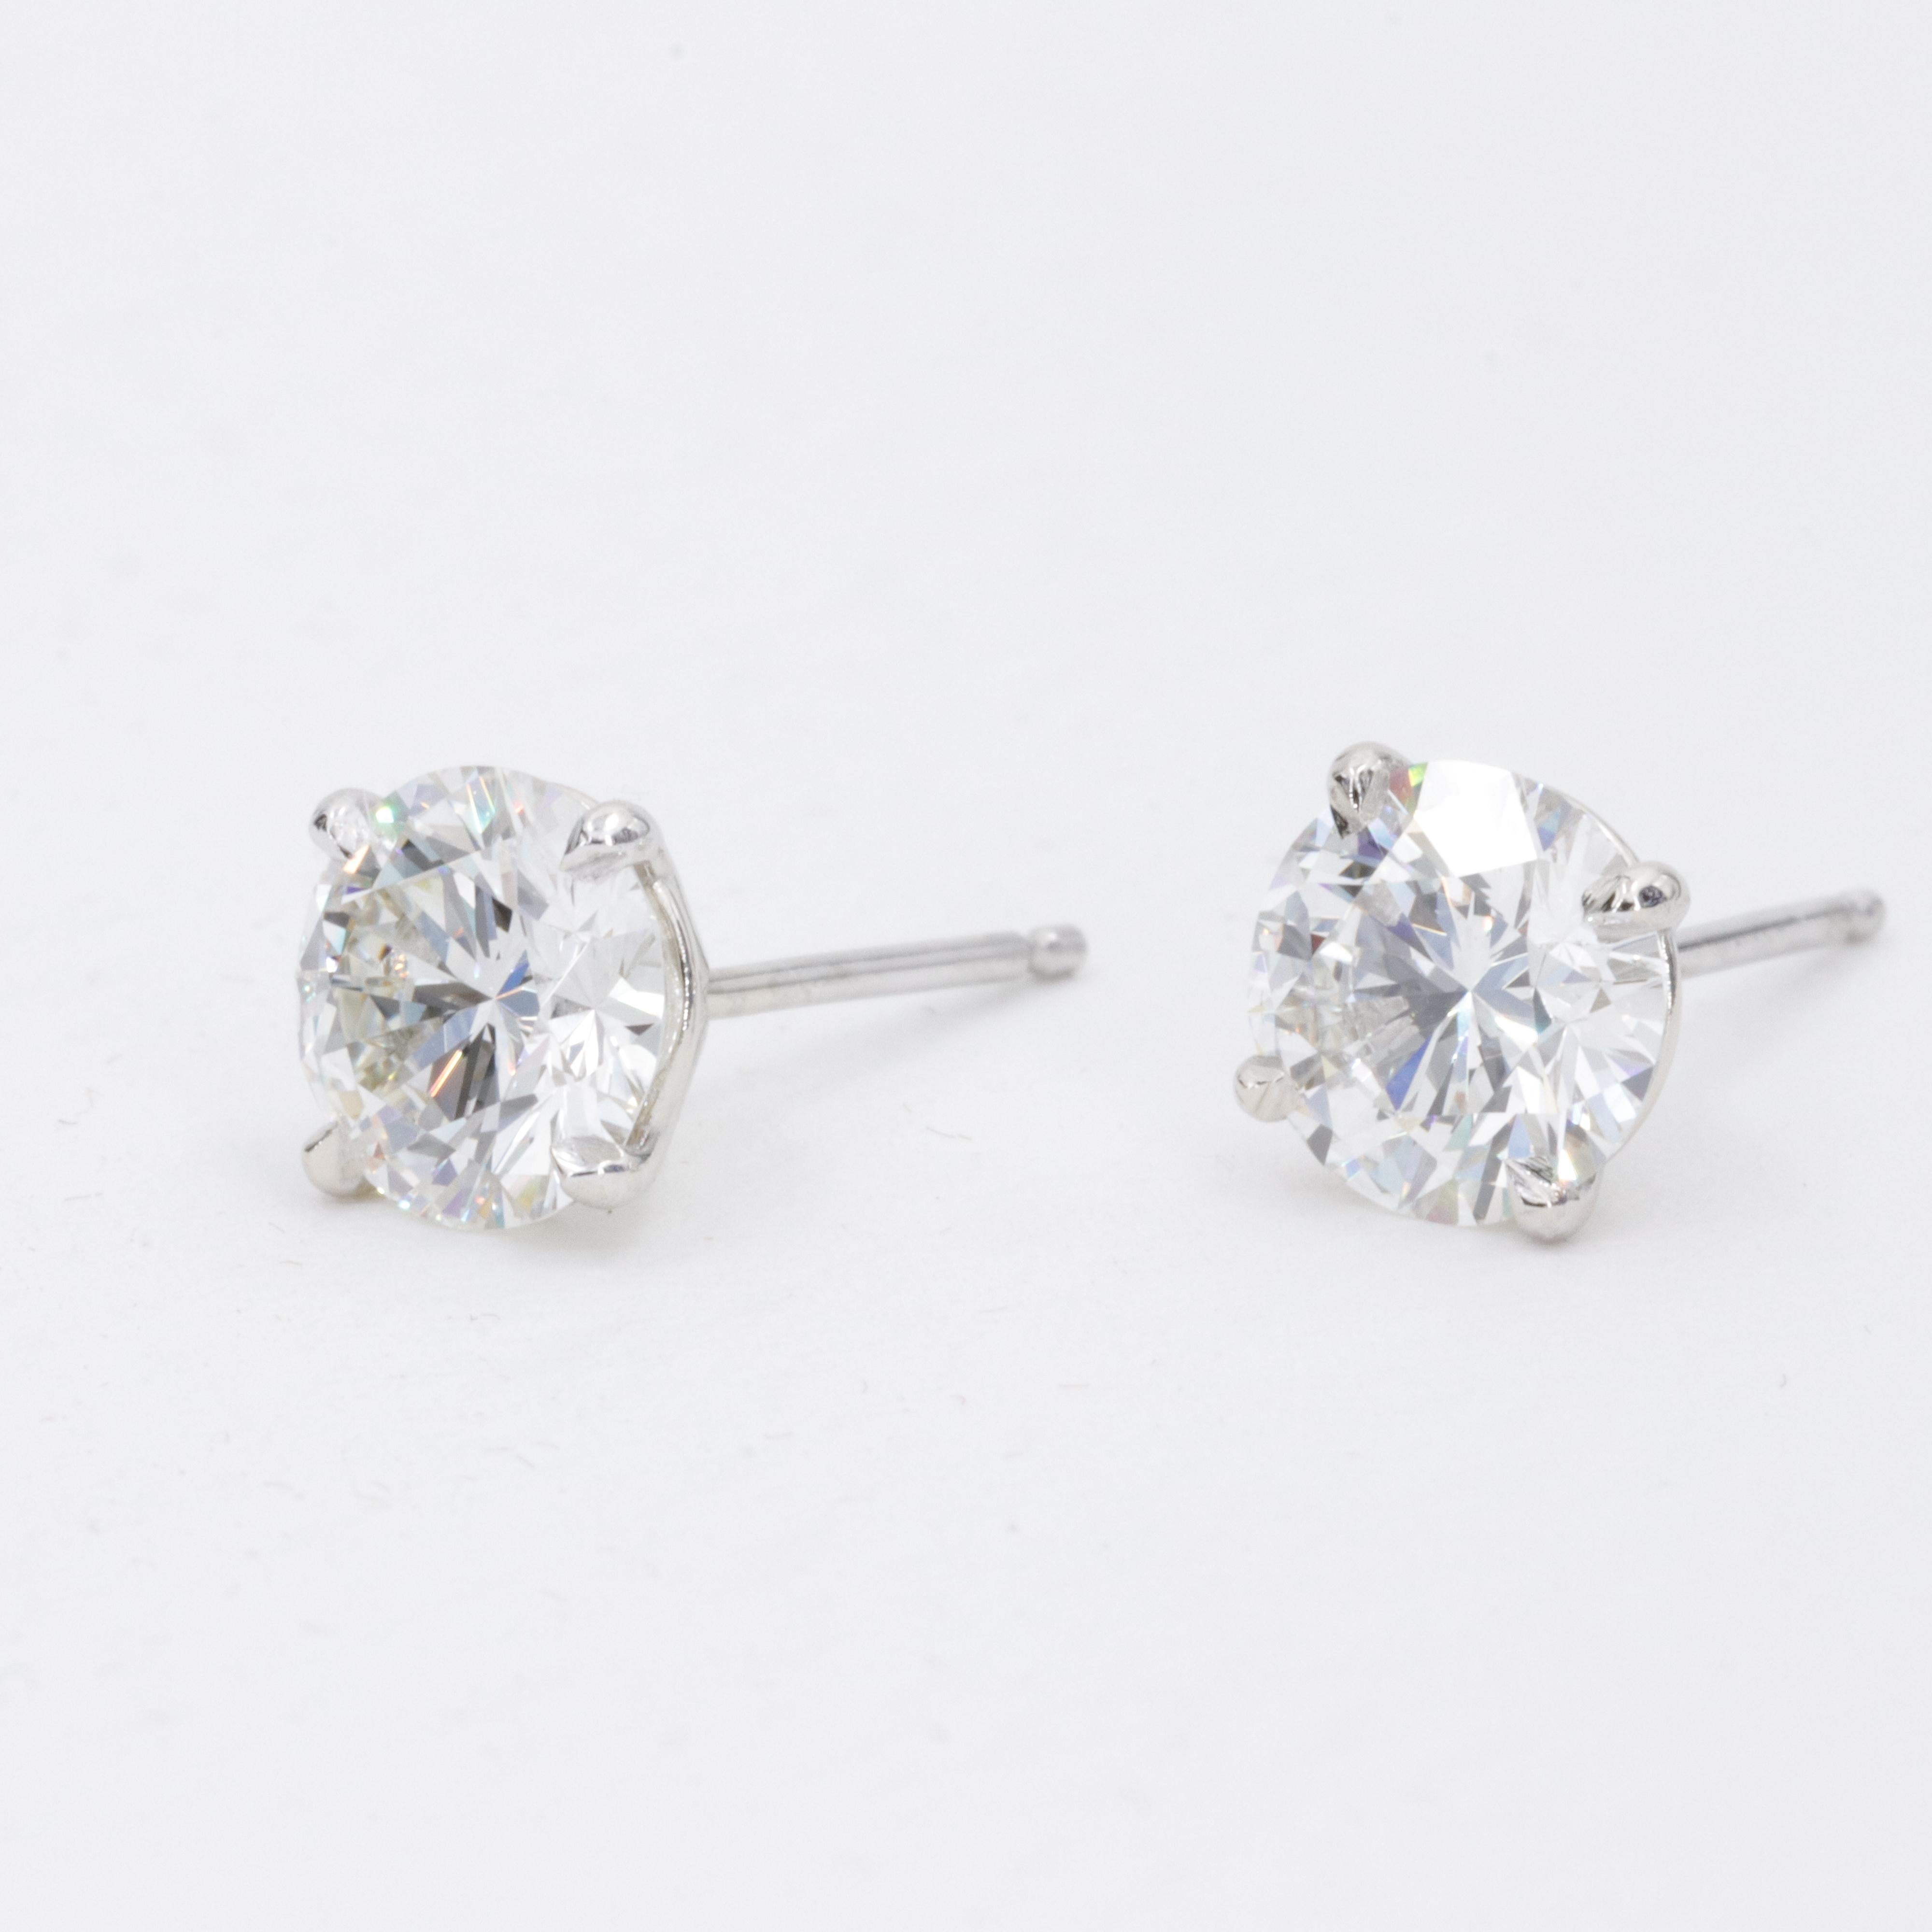 Round Cut 2.04 Carat GIA Diamond Stud Earrings Fine Quality in White Gold 4 Prong Settings For Sale